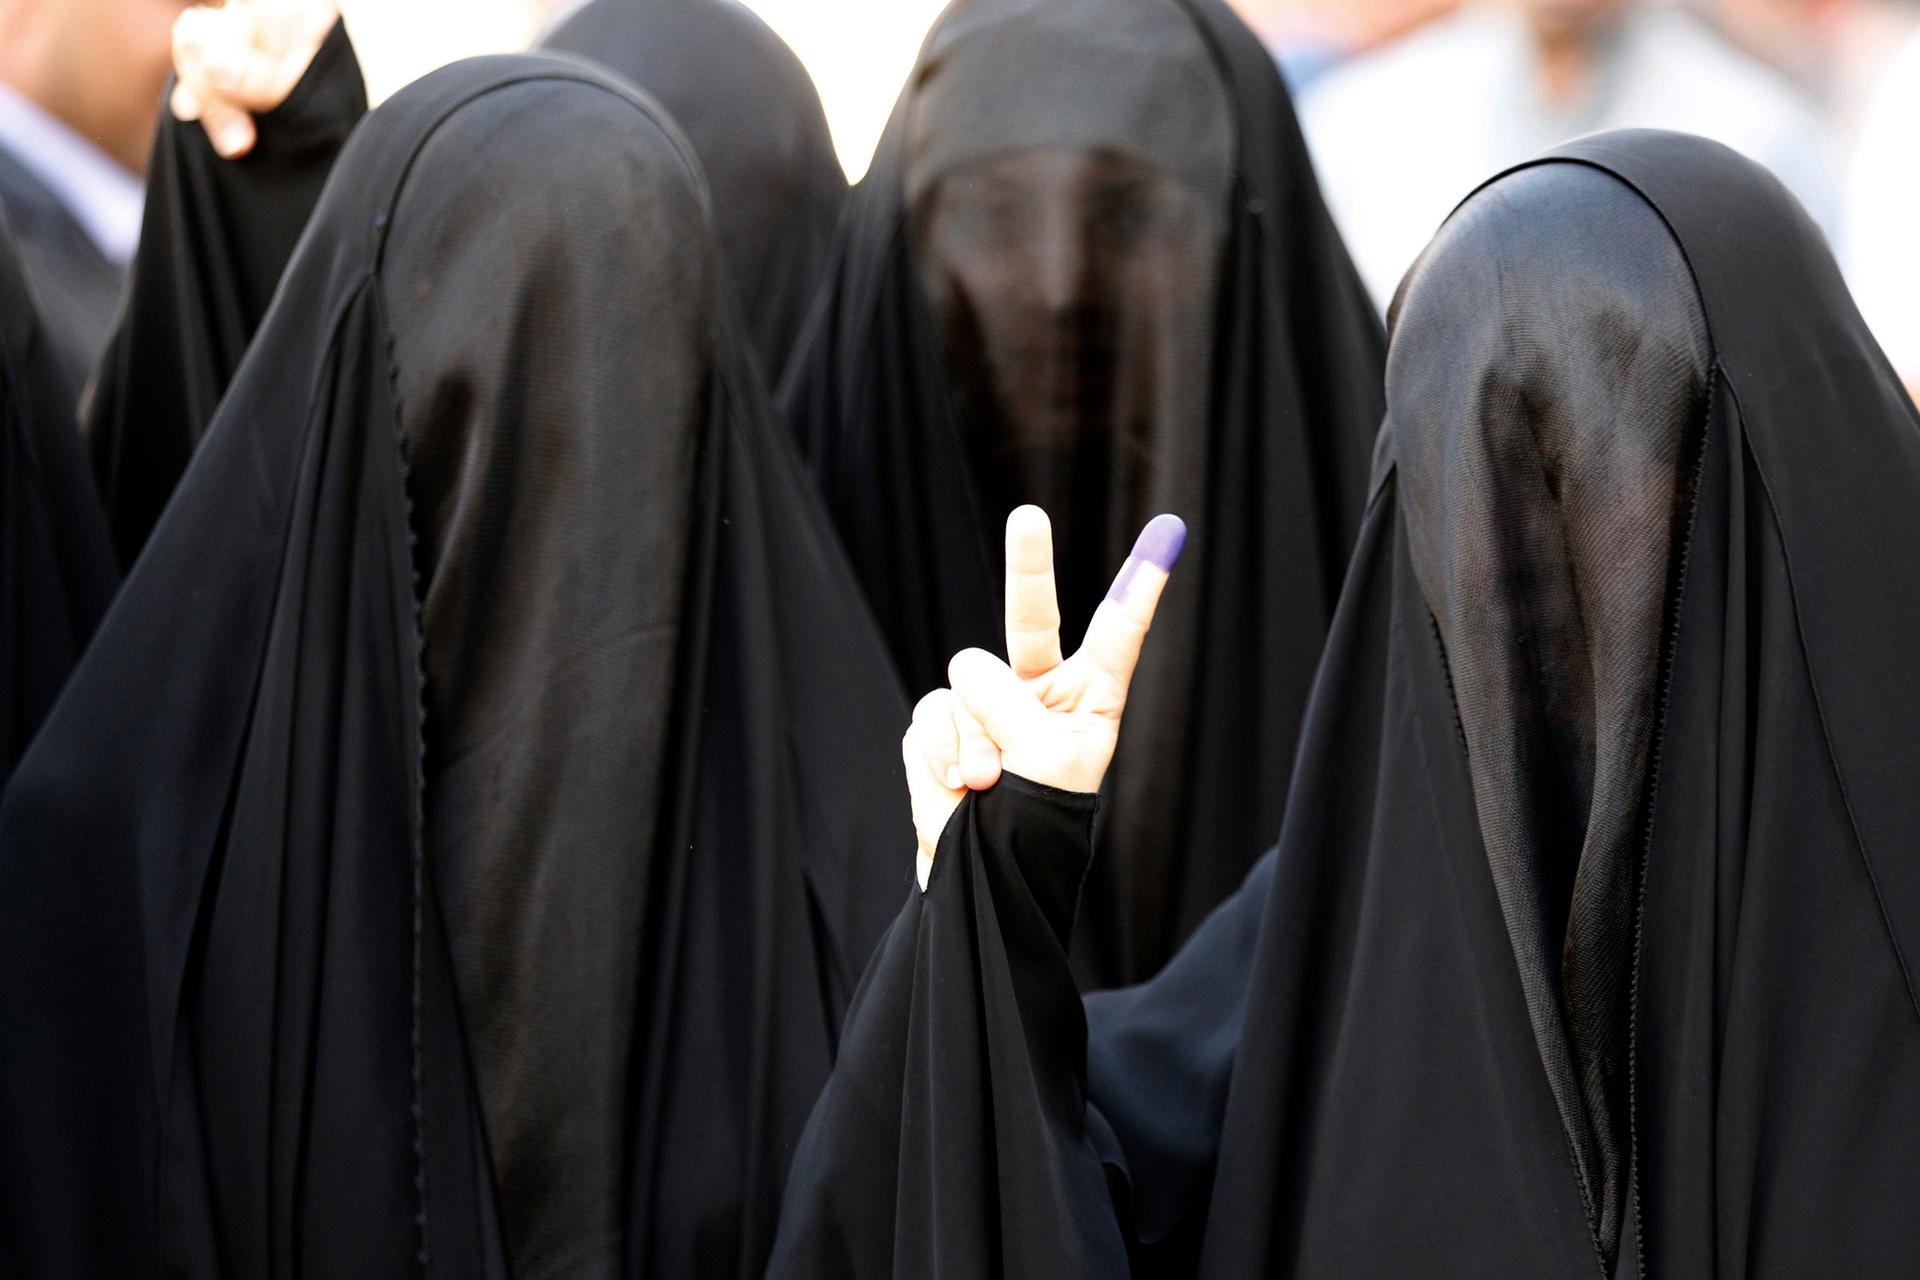 A woman in Baghdad shows her ink-stained finger after voting.